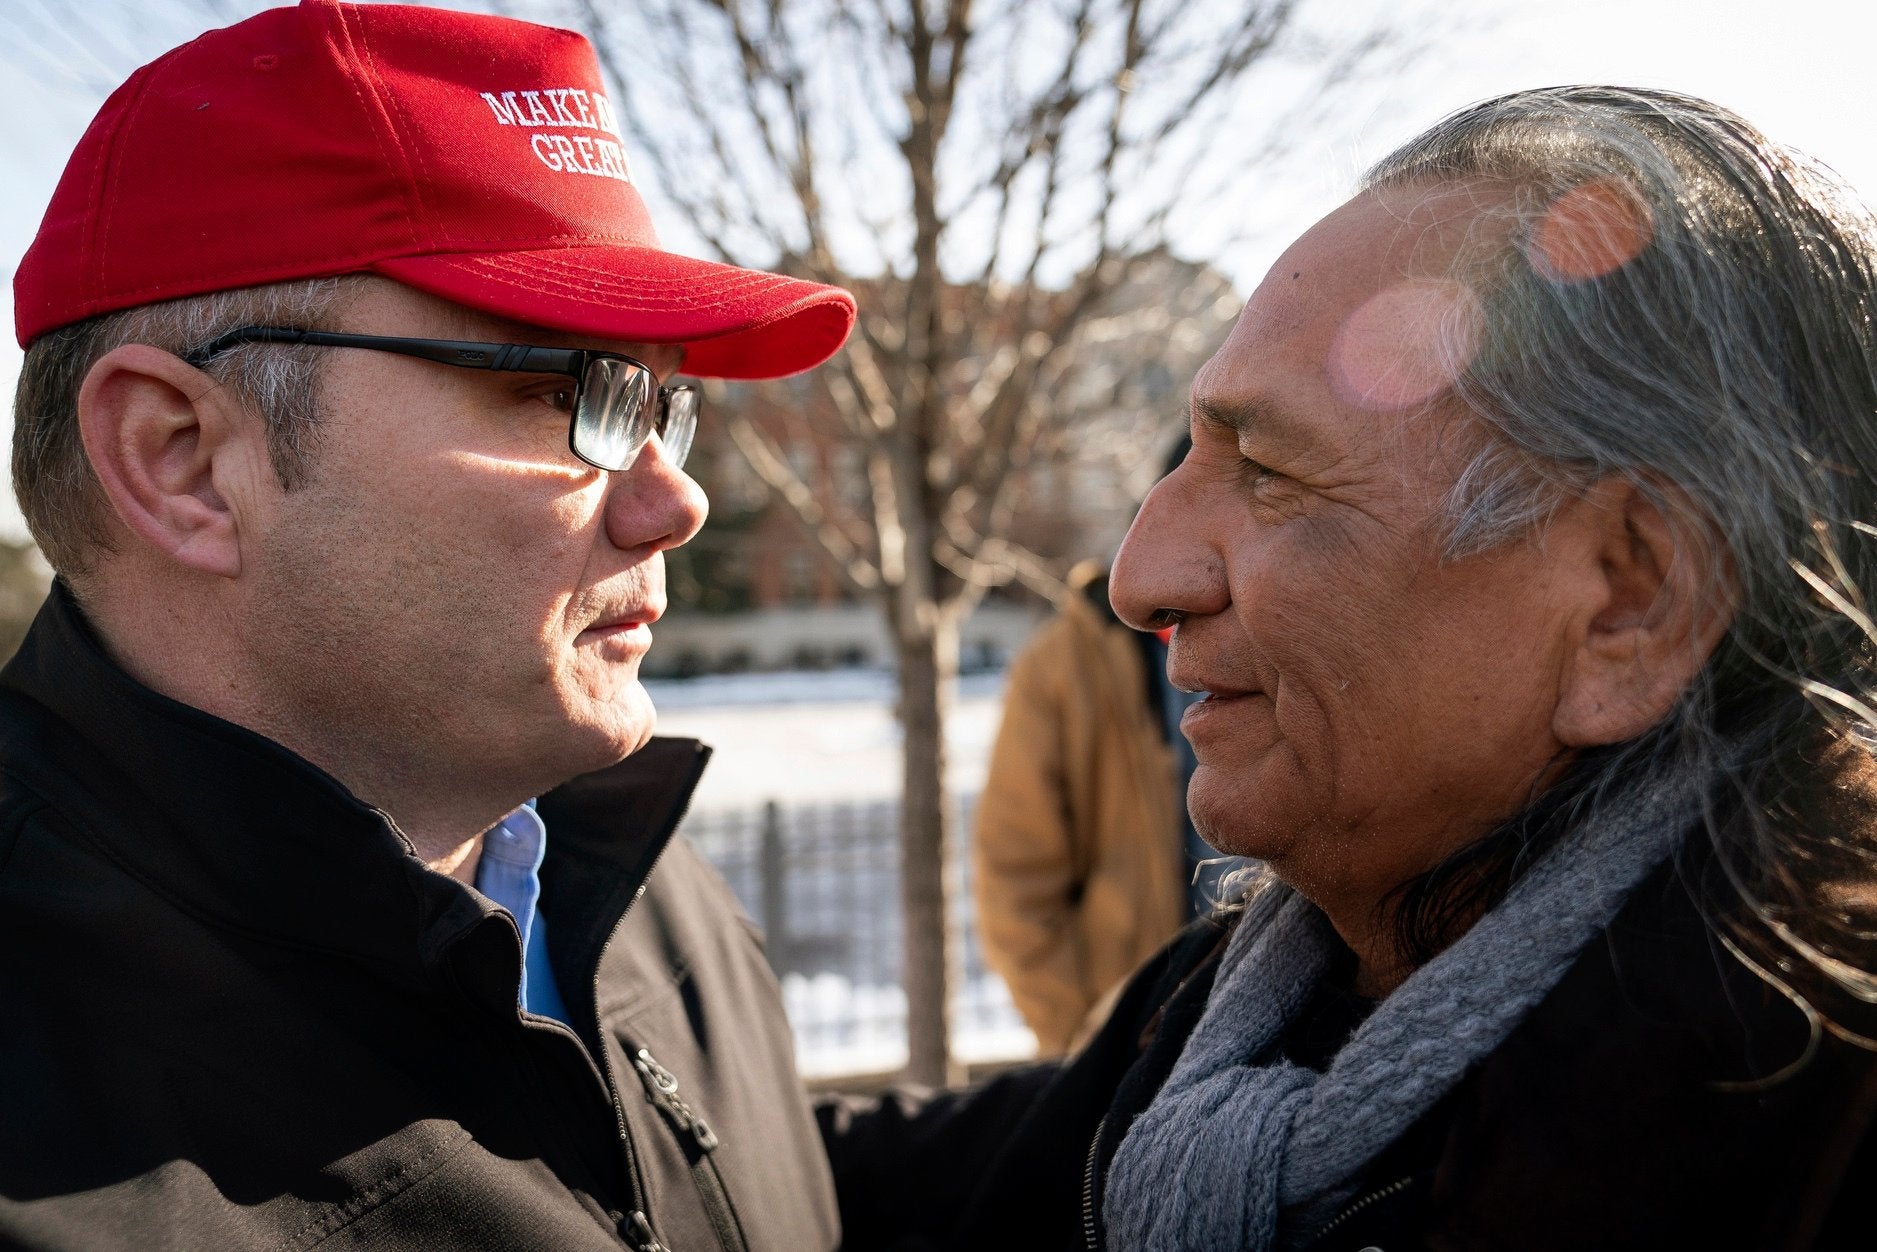 Guy Jones, left, and a supporter of President Donald Trump named Don embrace during a gathering of Native American supporters